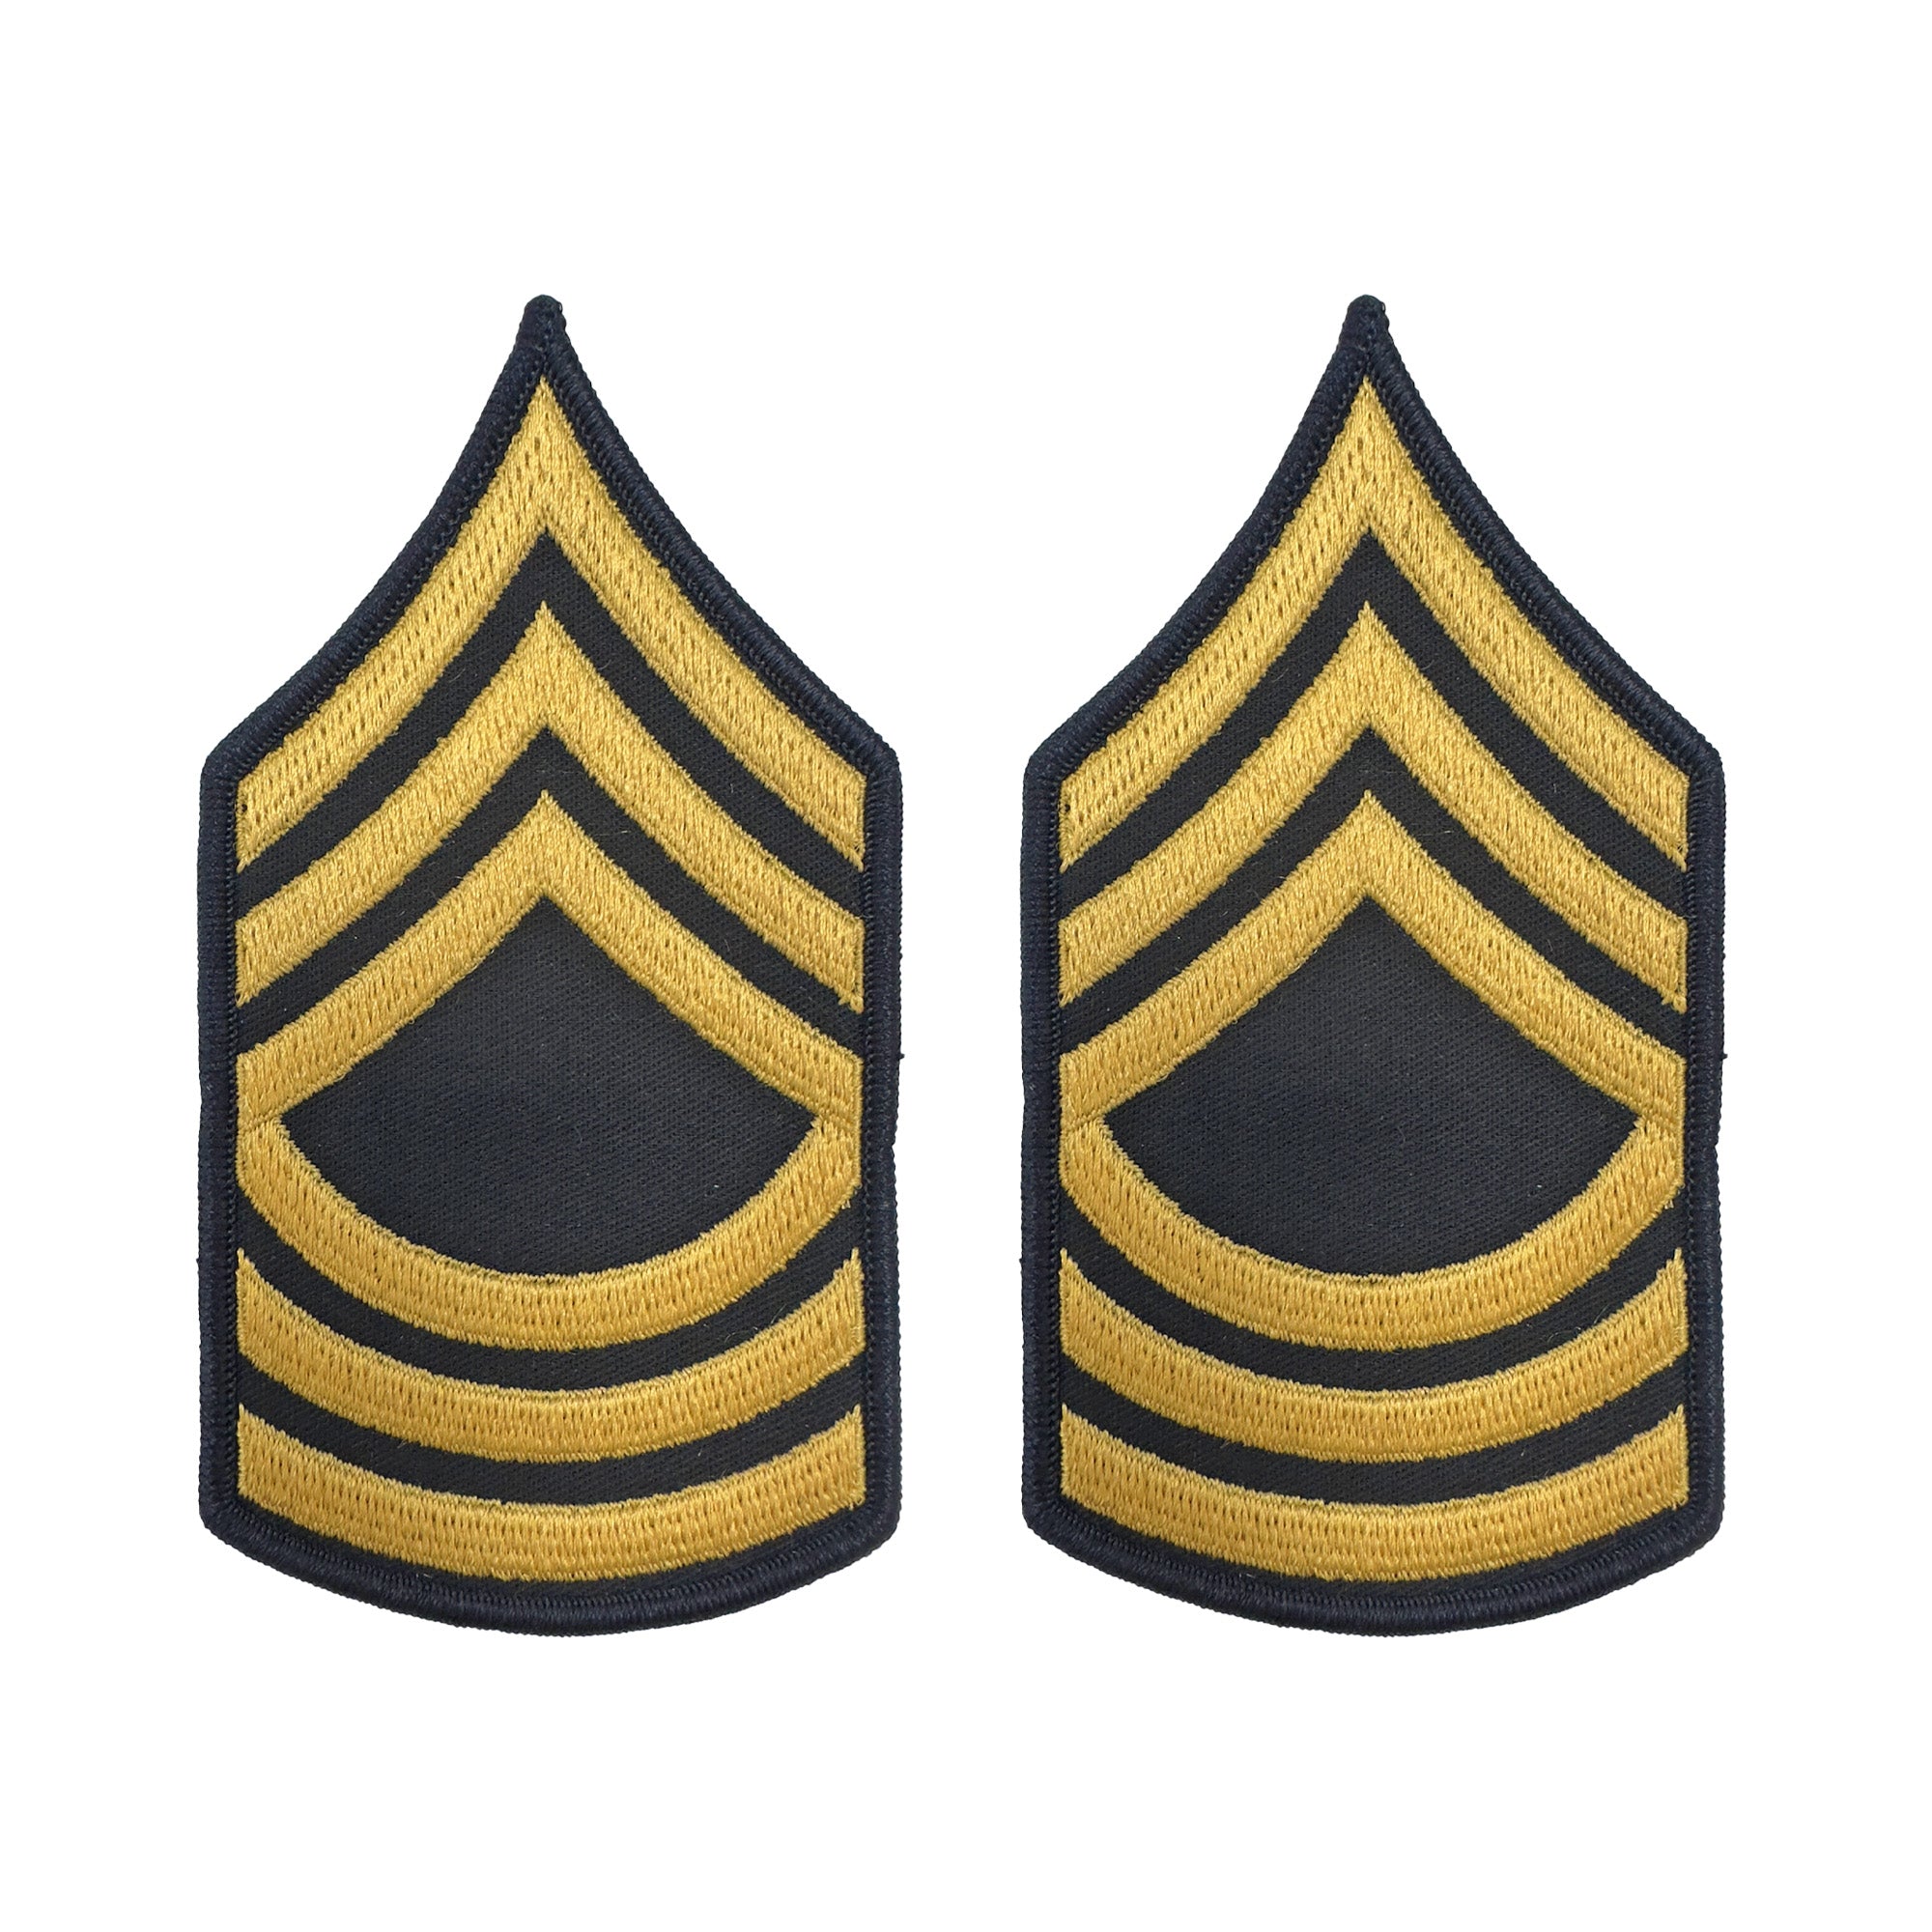 E8 Master Sergeant Gold on Blue Sew-on - Large-Male - Insignia Depot